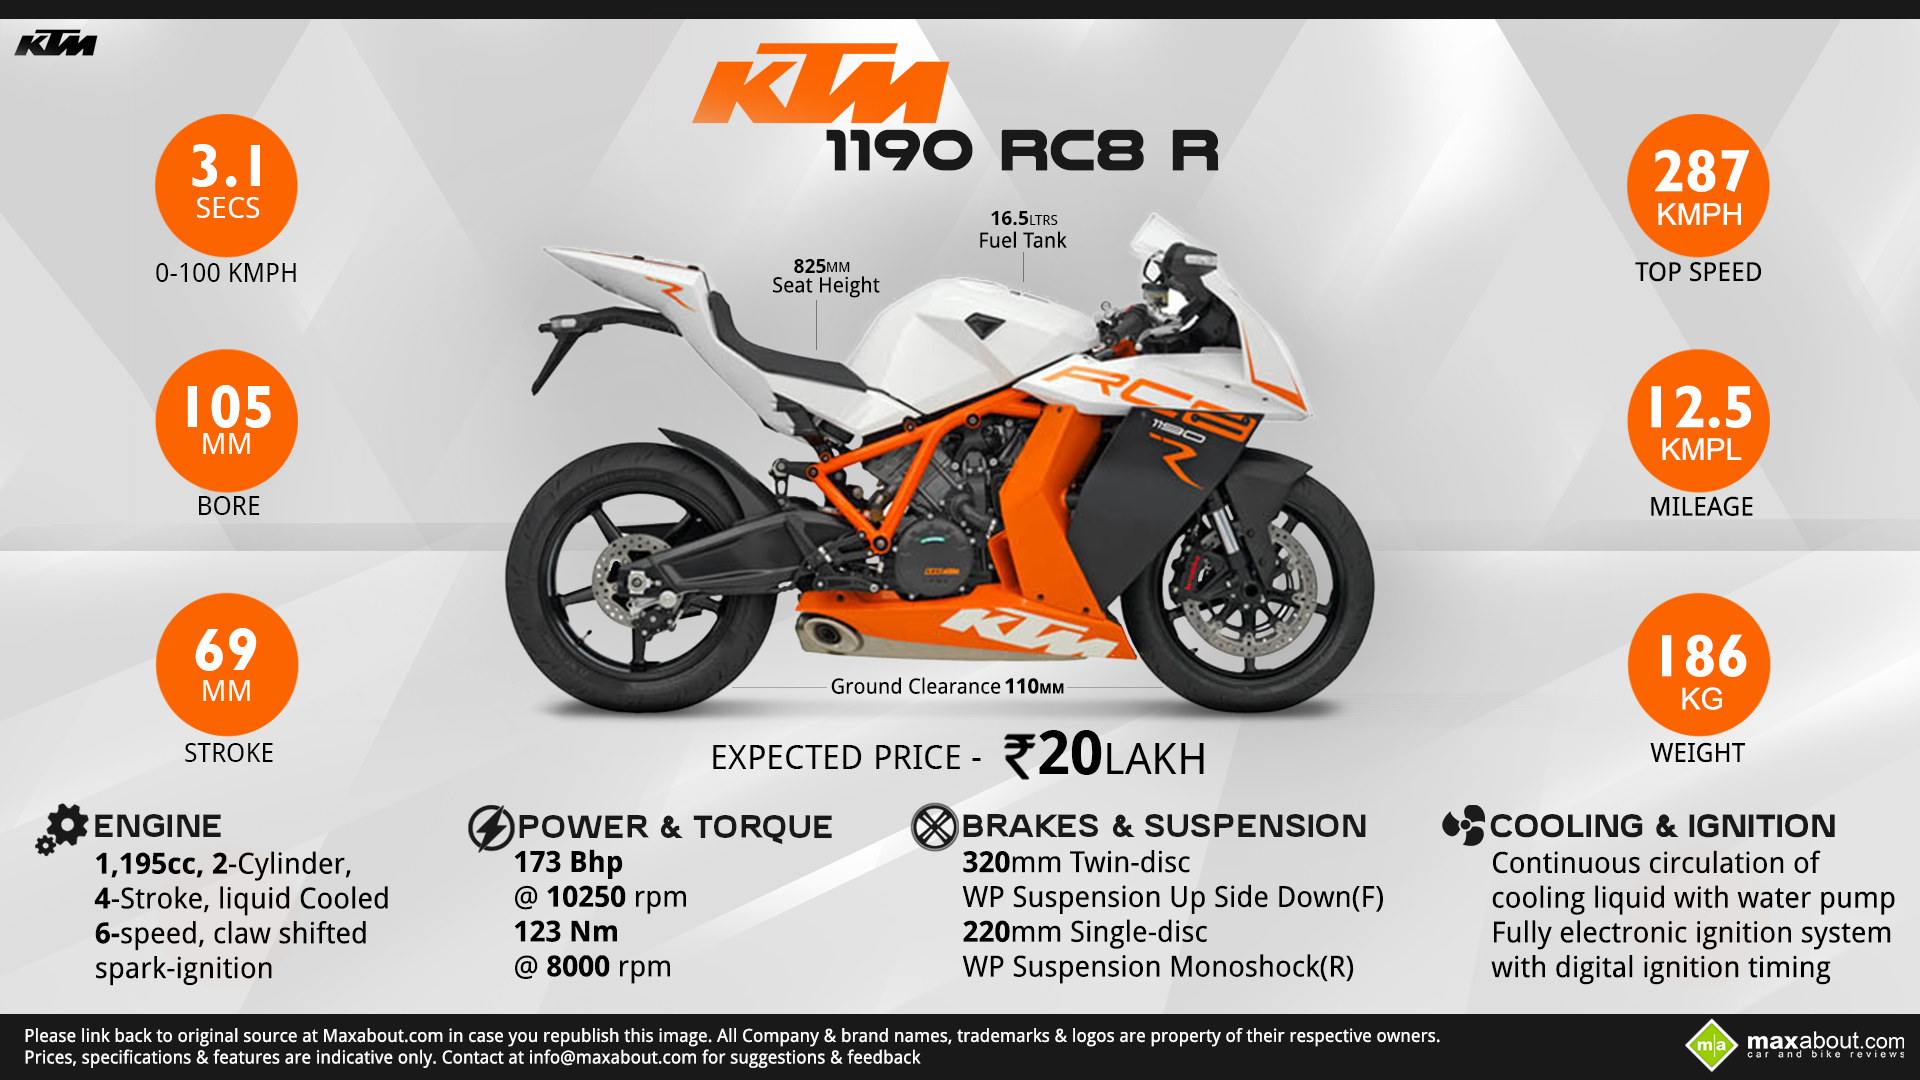 Pics Photos Related To Ktm Rc8 Wallpaper